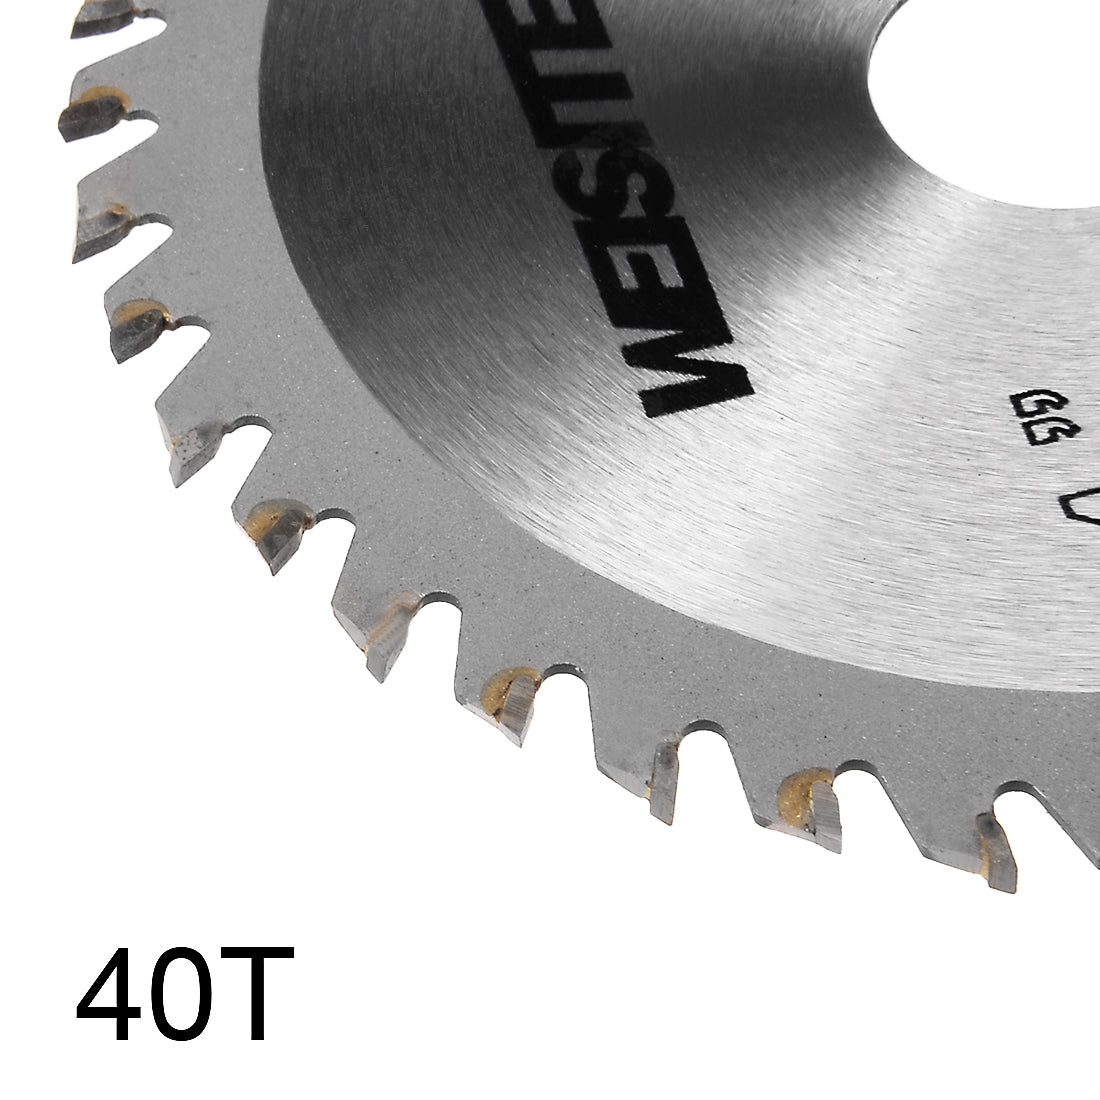 uxcell Uxcell Circular Saw Blade, Carbide Tipped Slitting Saw